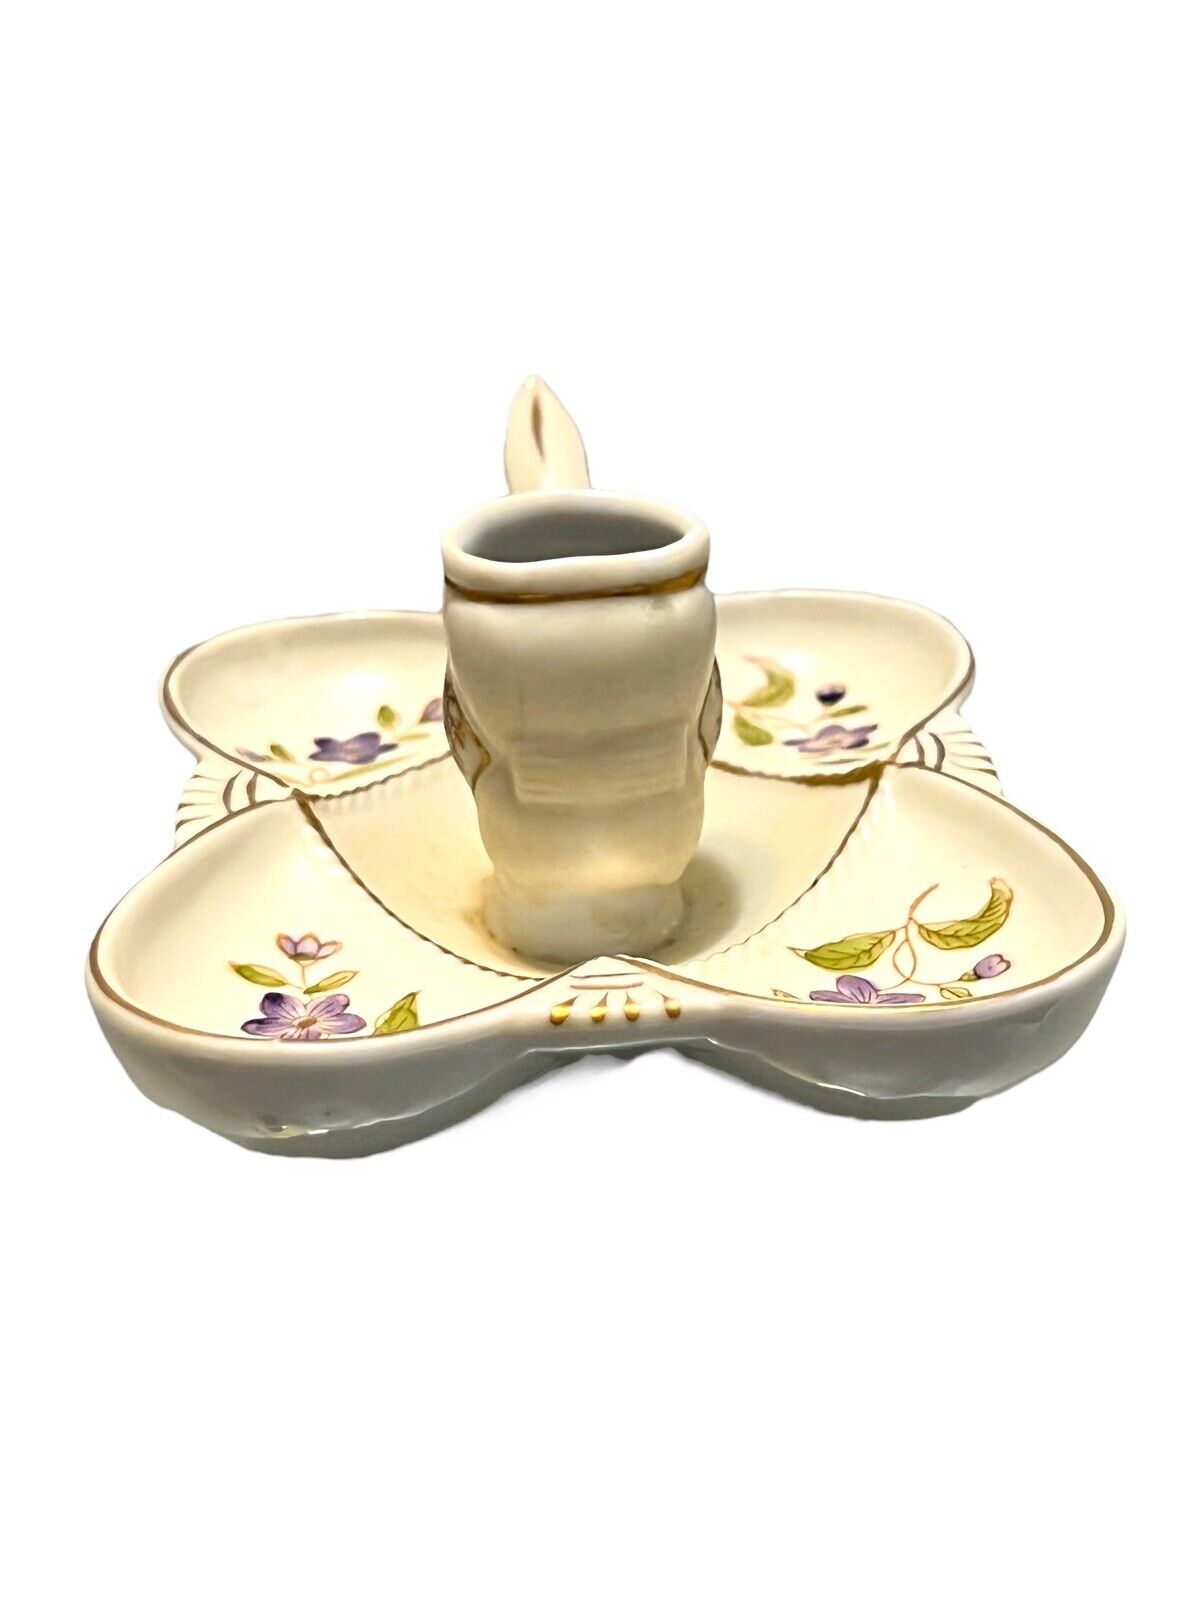 VERY RARE MID CENTURY LIPPER & MANN CANDLE HOLDER WITH VIOLETS, GOLD TRIM